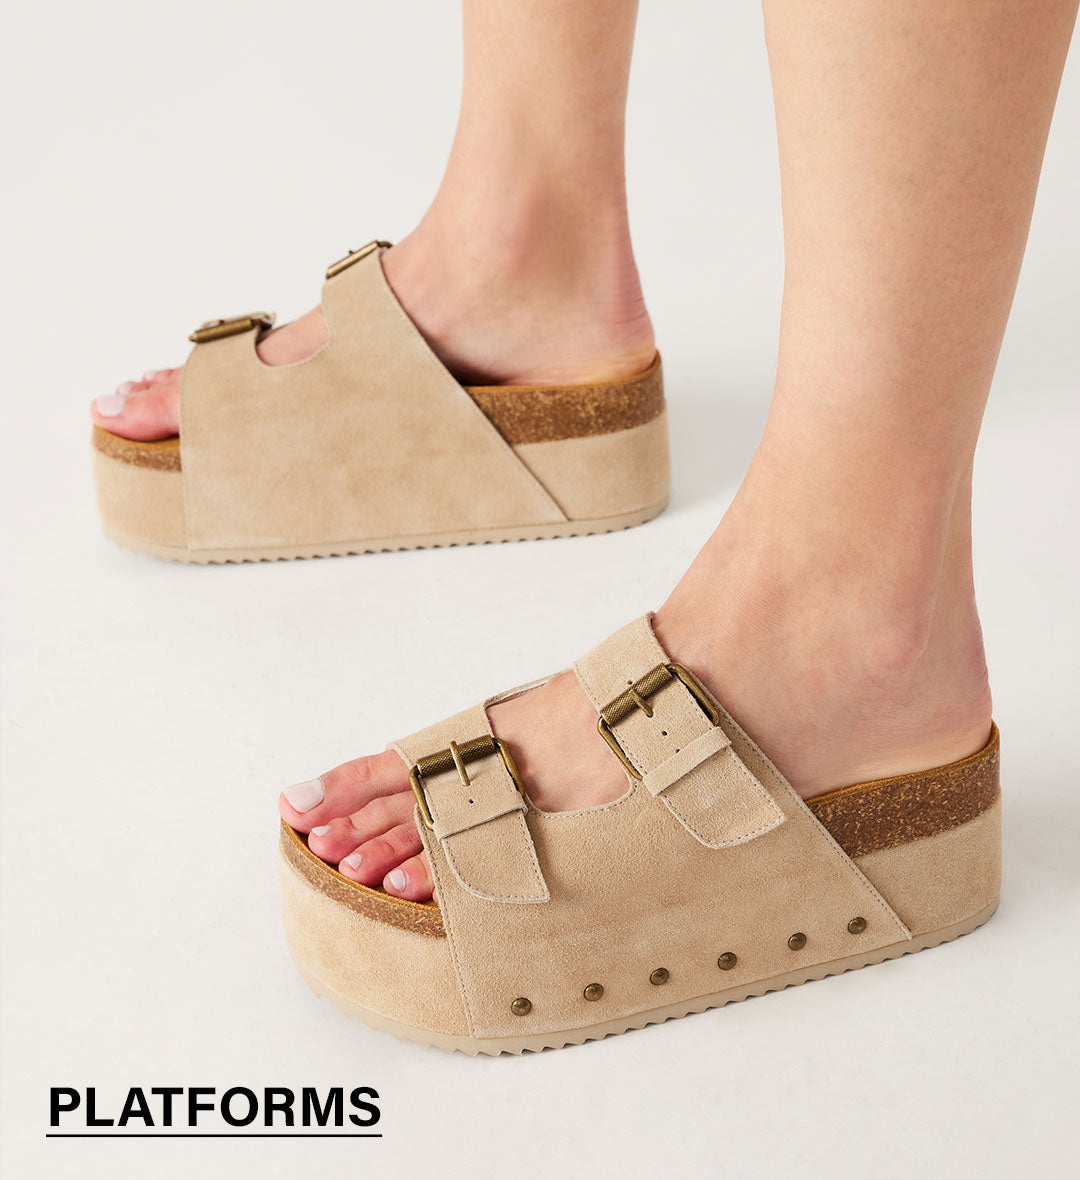 Sandal Platforms Wedges Beach Flip Flops Studded Straps with Stone